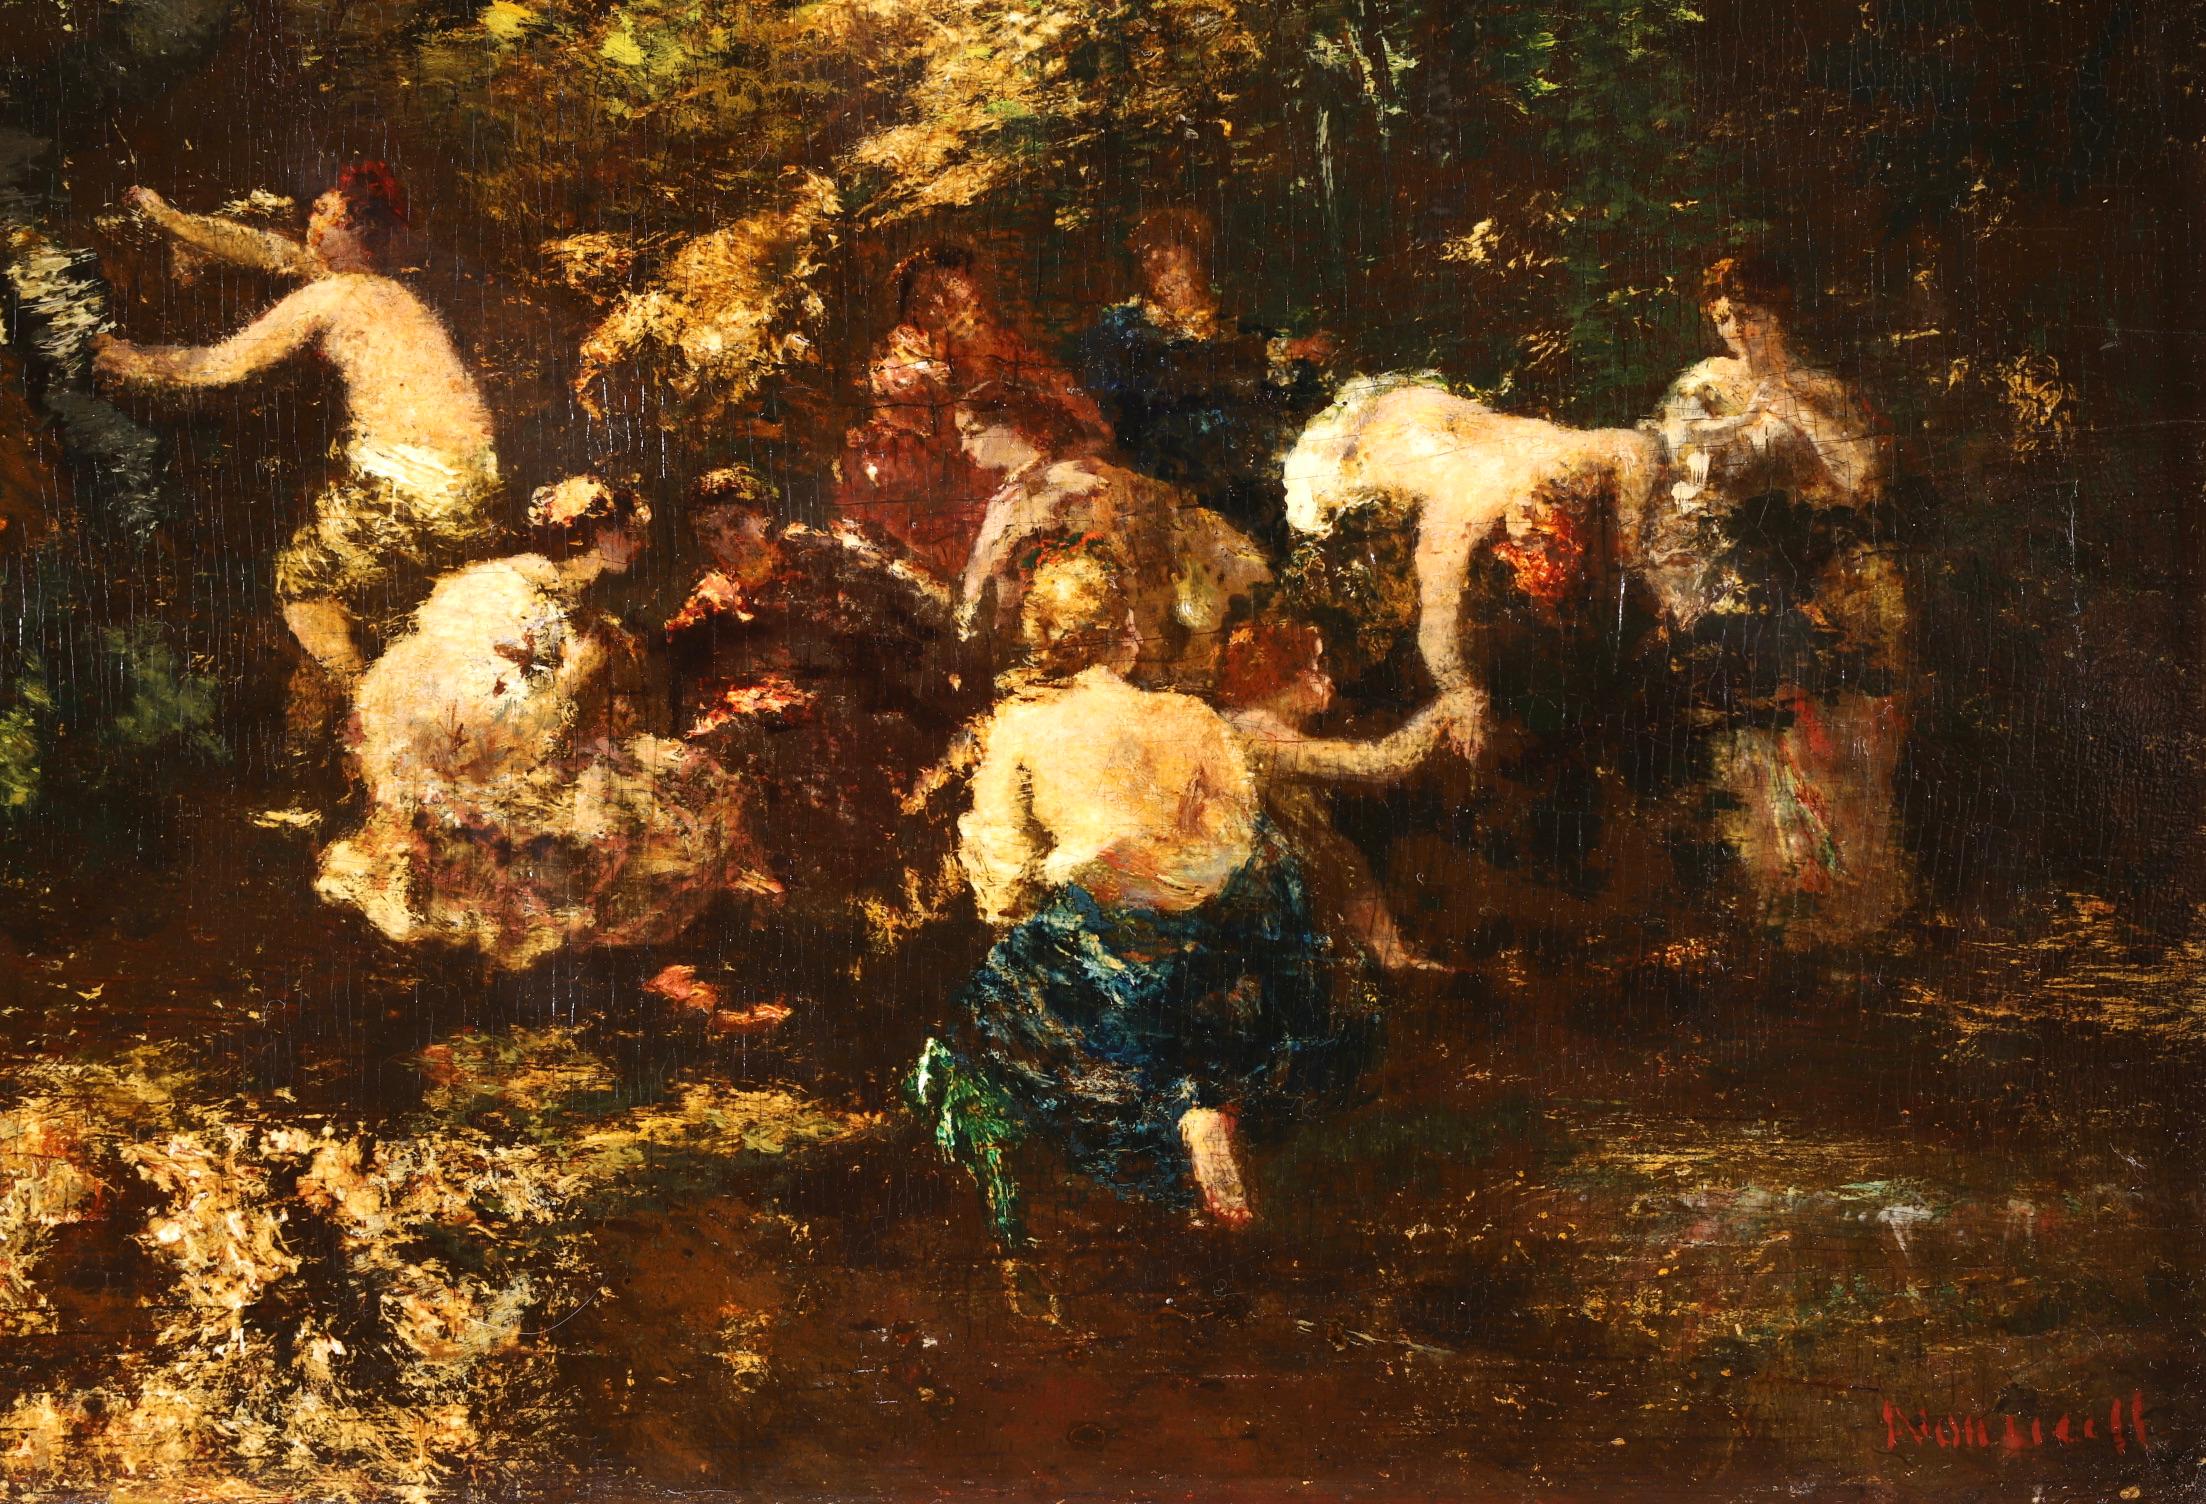 Les Baigneuses - Impressionist Oil, Figures in Landscape by Adolphe Monticelli 1